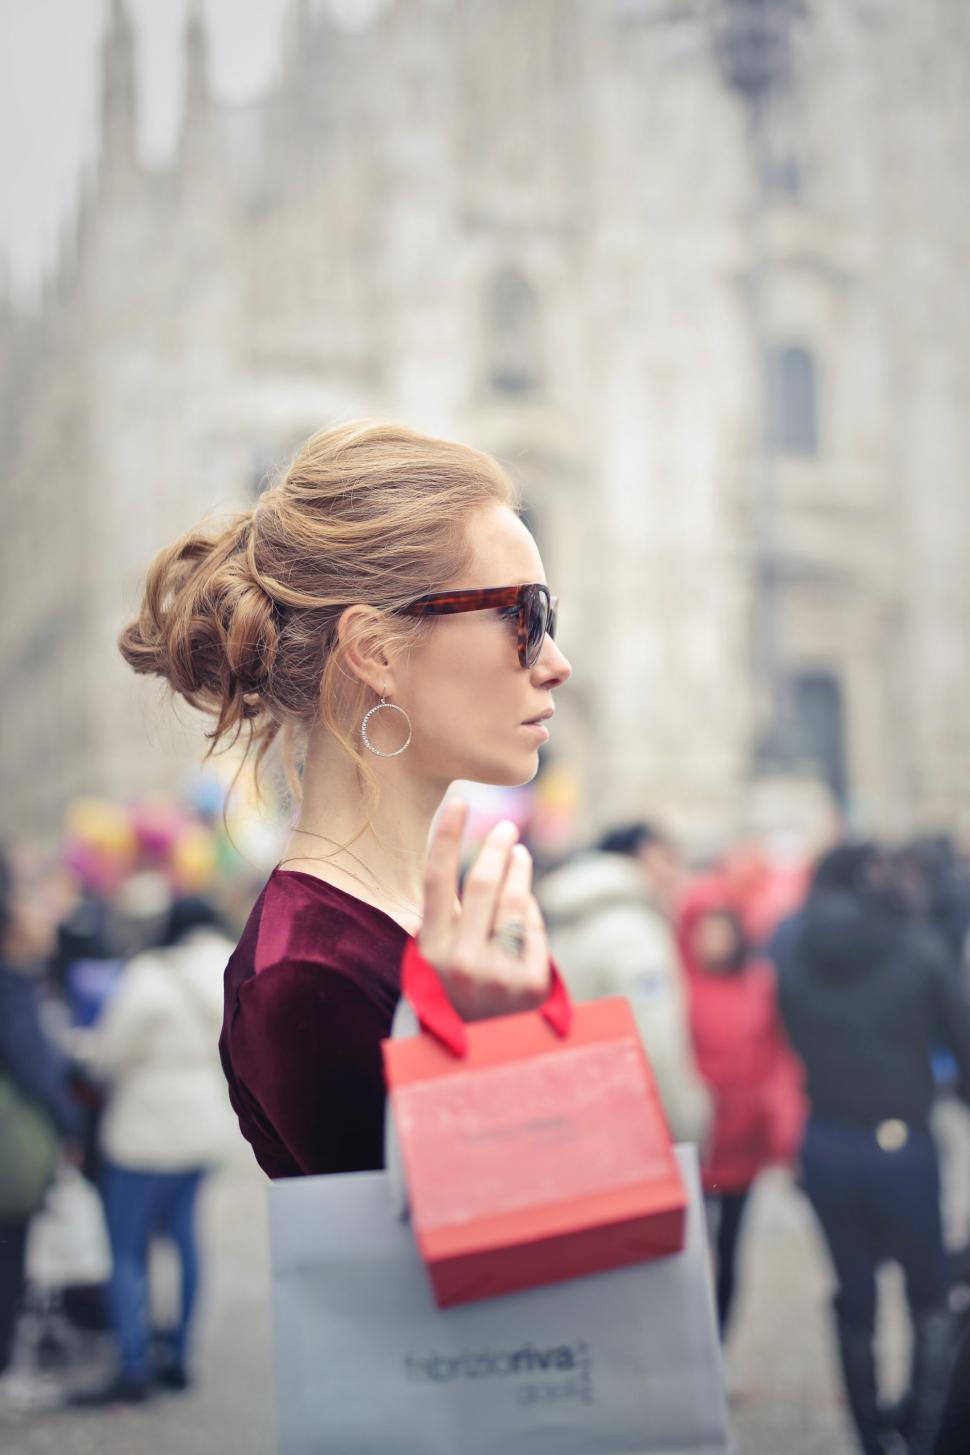 Free Image of A young blond woman with elegant hair bun holding shopping bags 